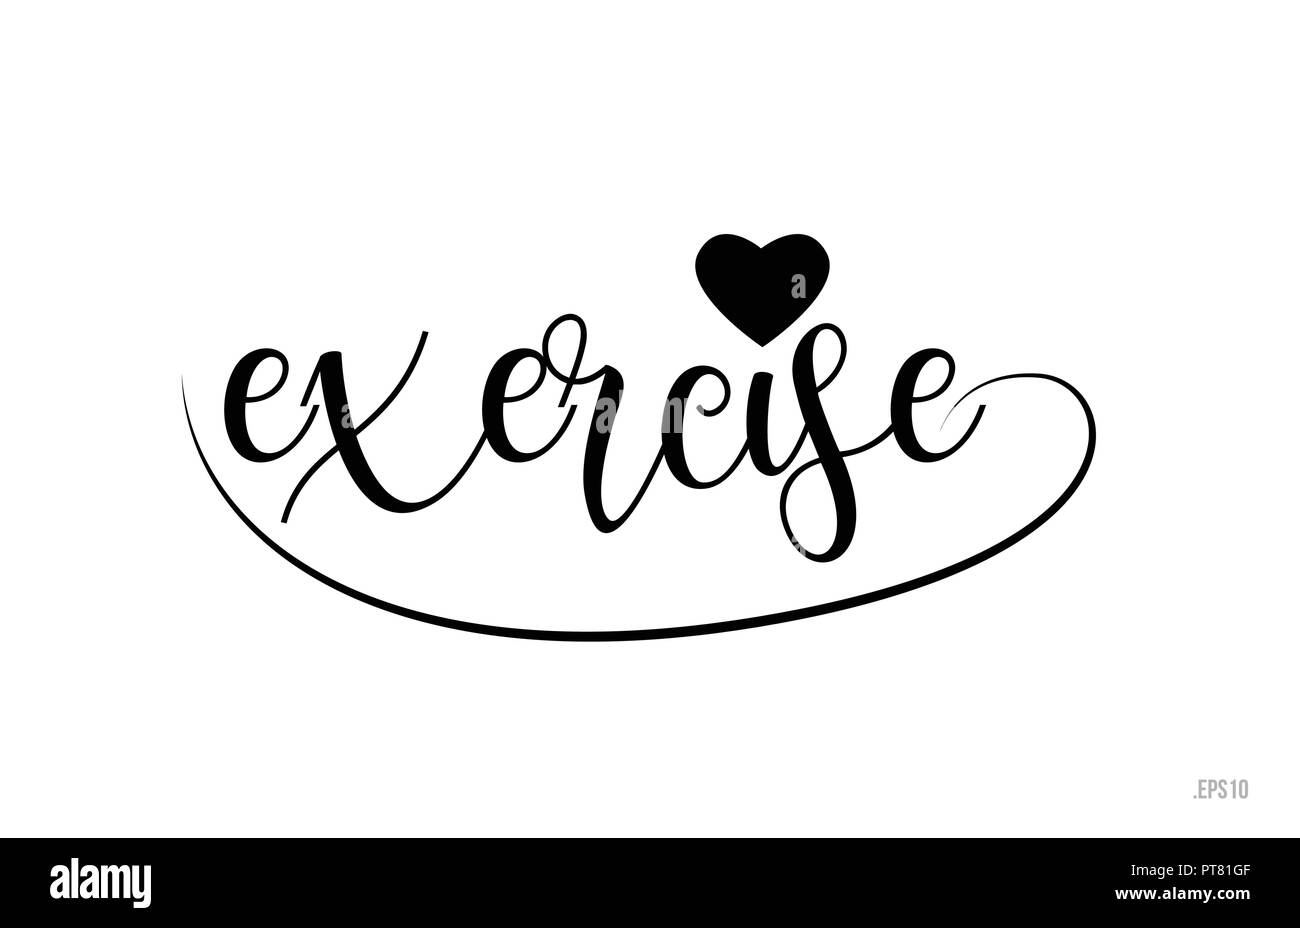 exercise word text with black and white love heart suitable for